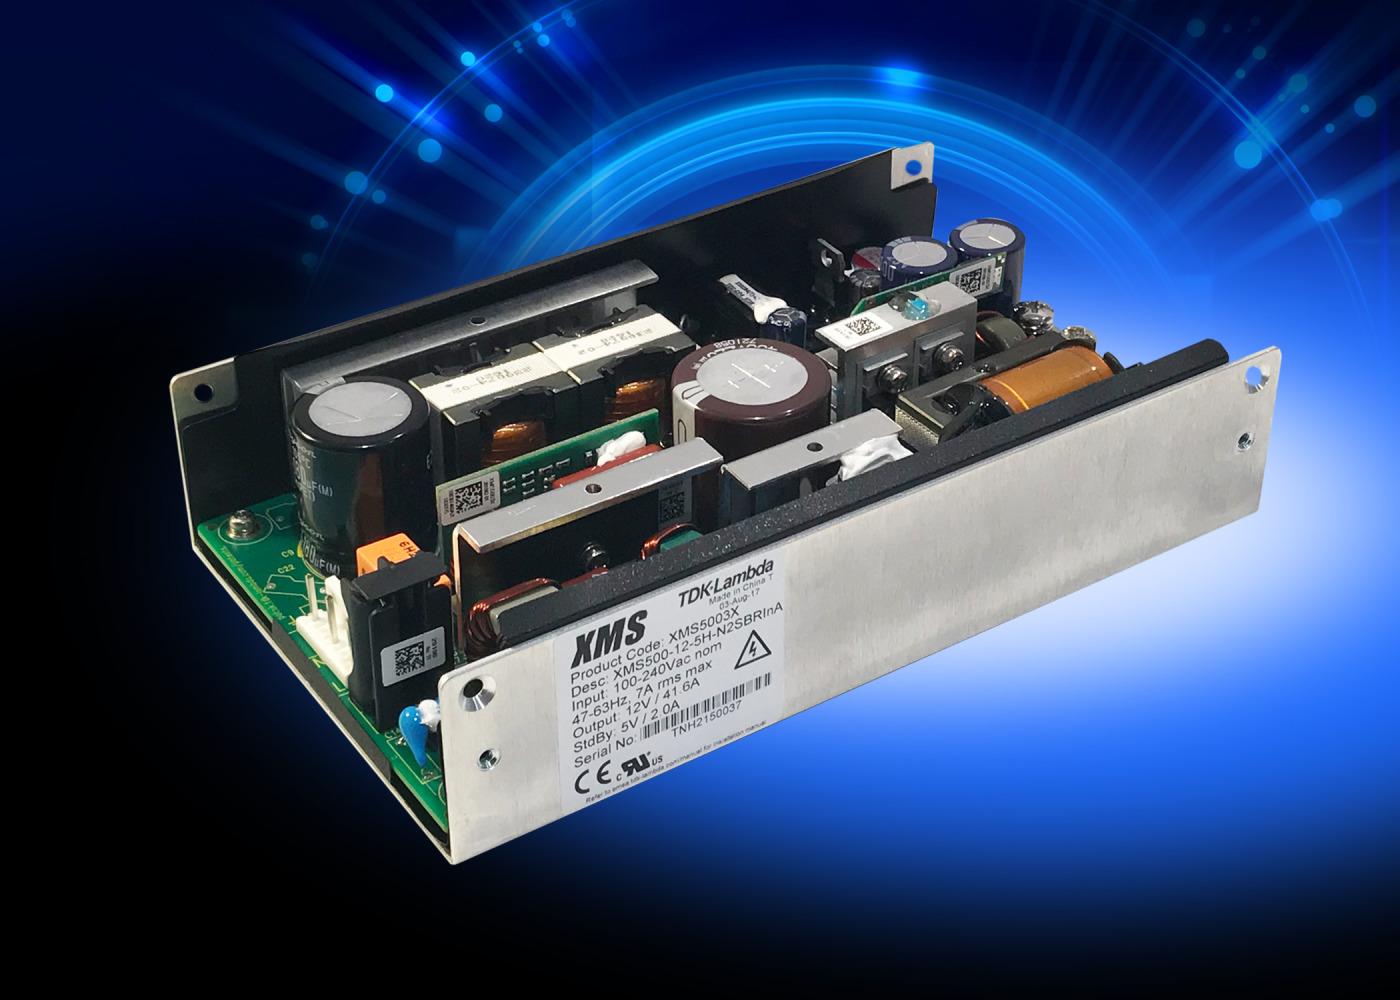 Class I and II 500W Configurable Medical Power Supplies Require Low Airflow and are Curve B EMI Compliant